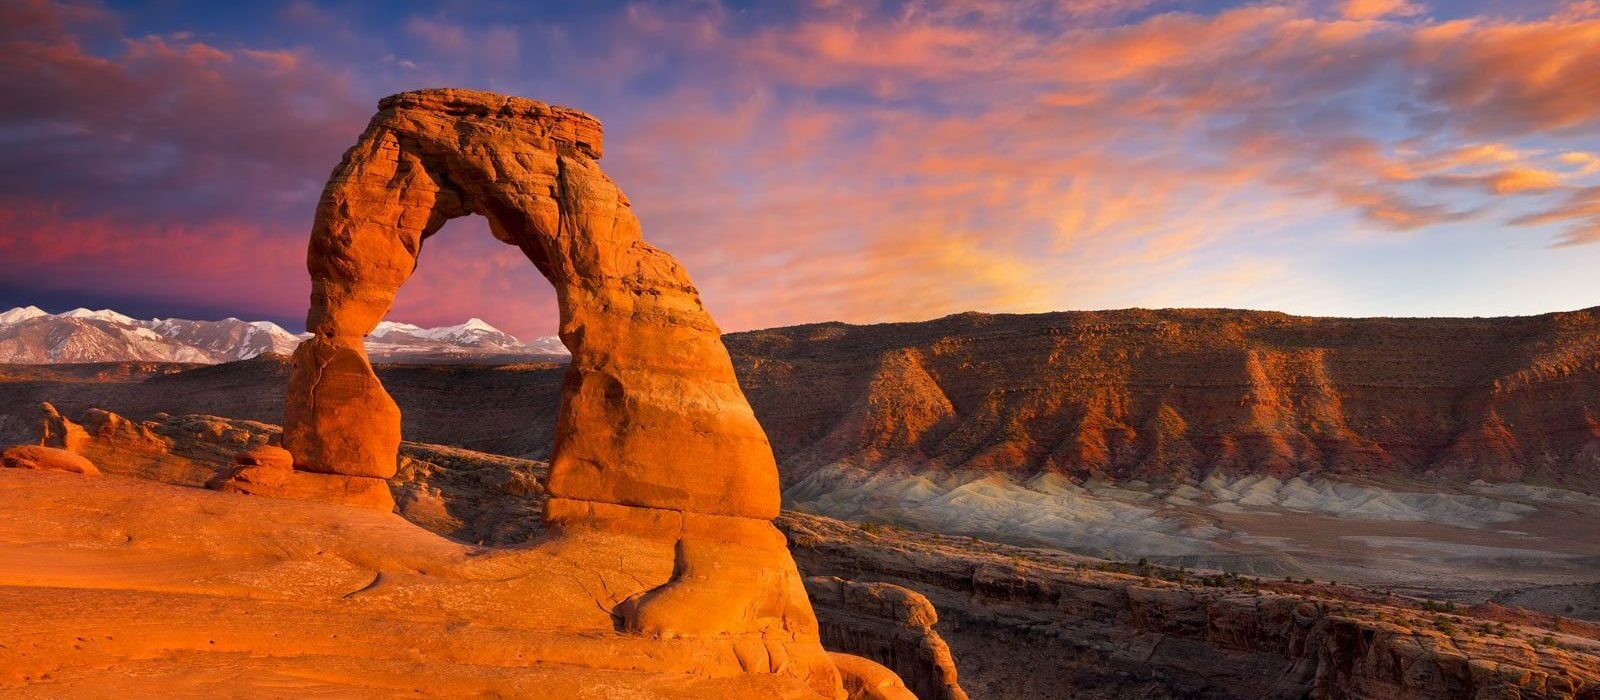 11 U.S. National Parks That Are Ripe for Adventure